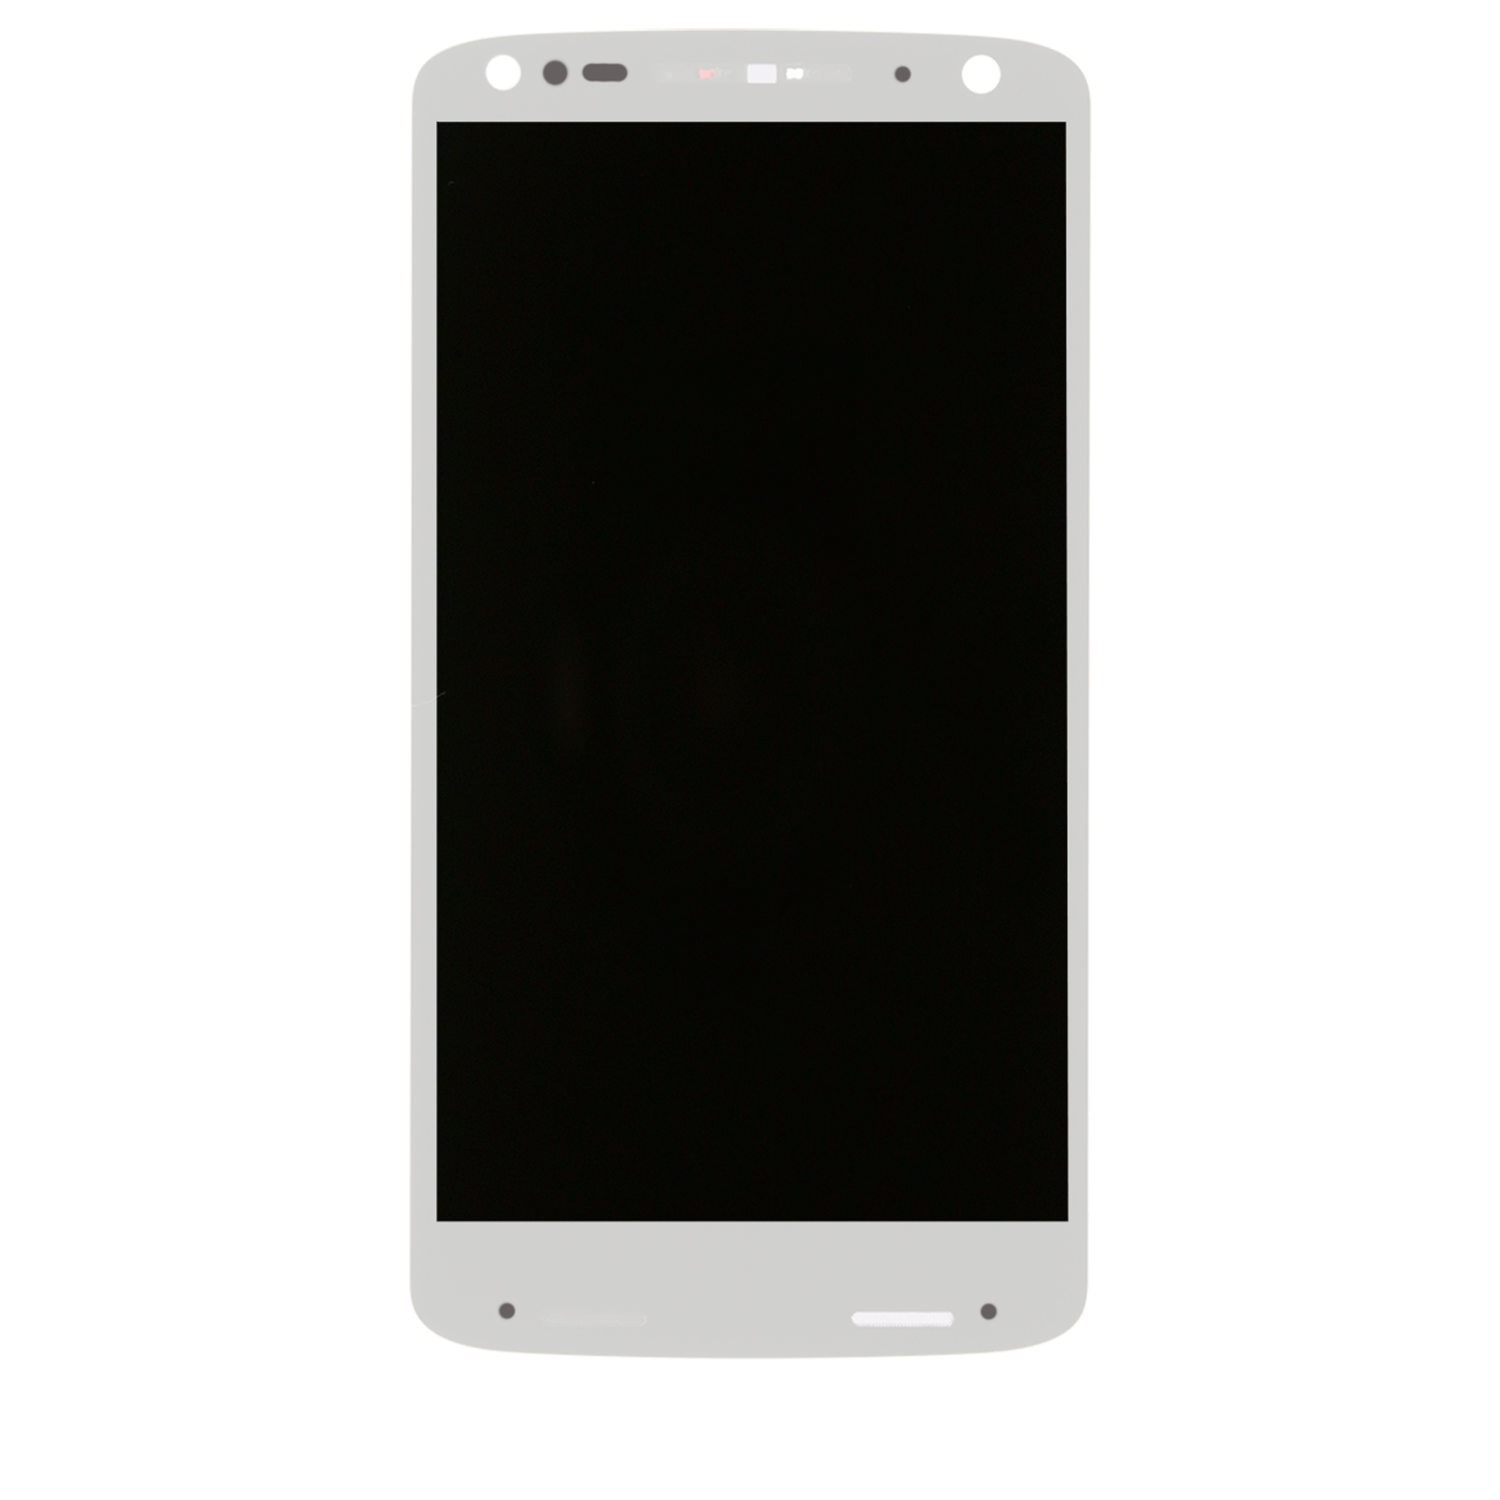 Replacement LCD Assembly With Frame Compatible For Motorola Moto X Force (XT1580 / 2015) / Droid Turbo 2 (XT1585 / 2015) (Refurbished) (White)